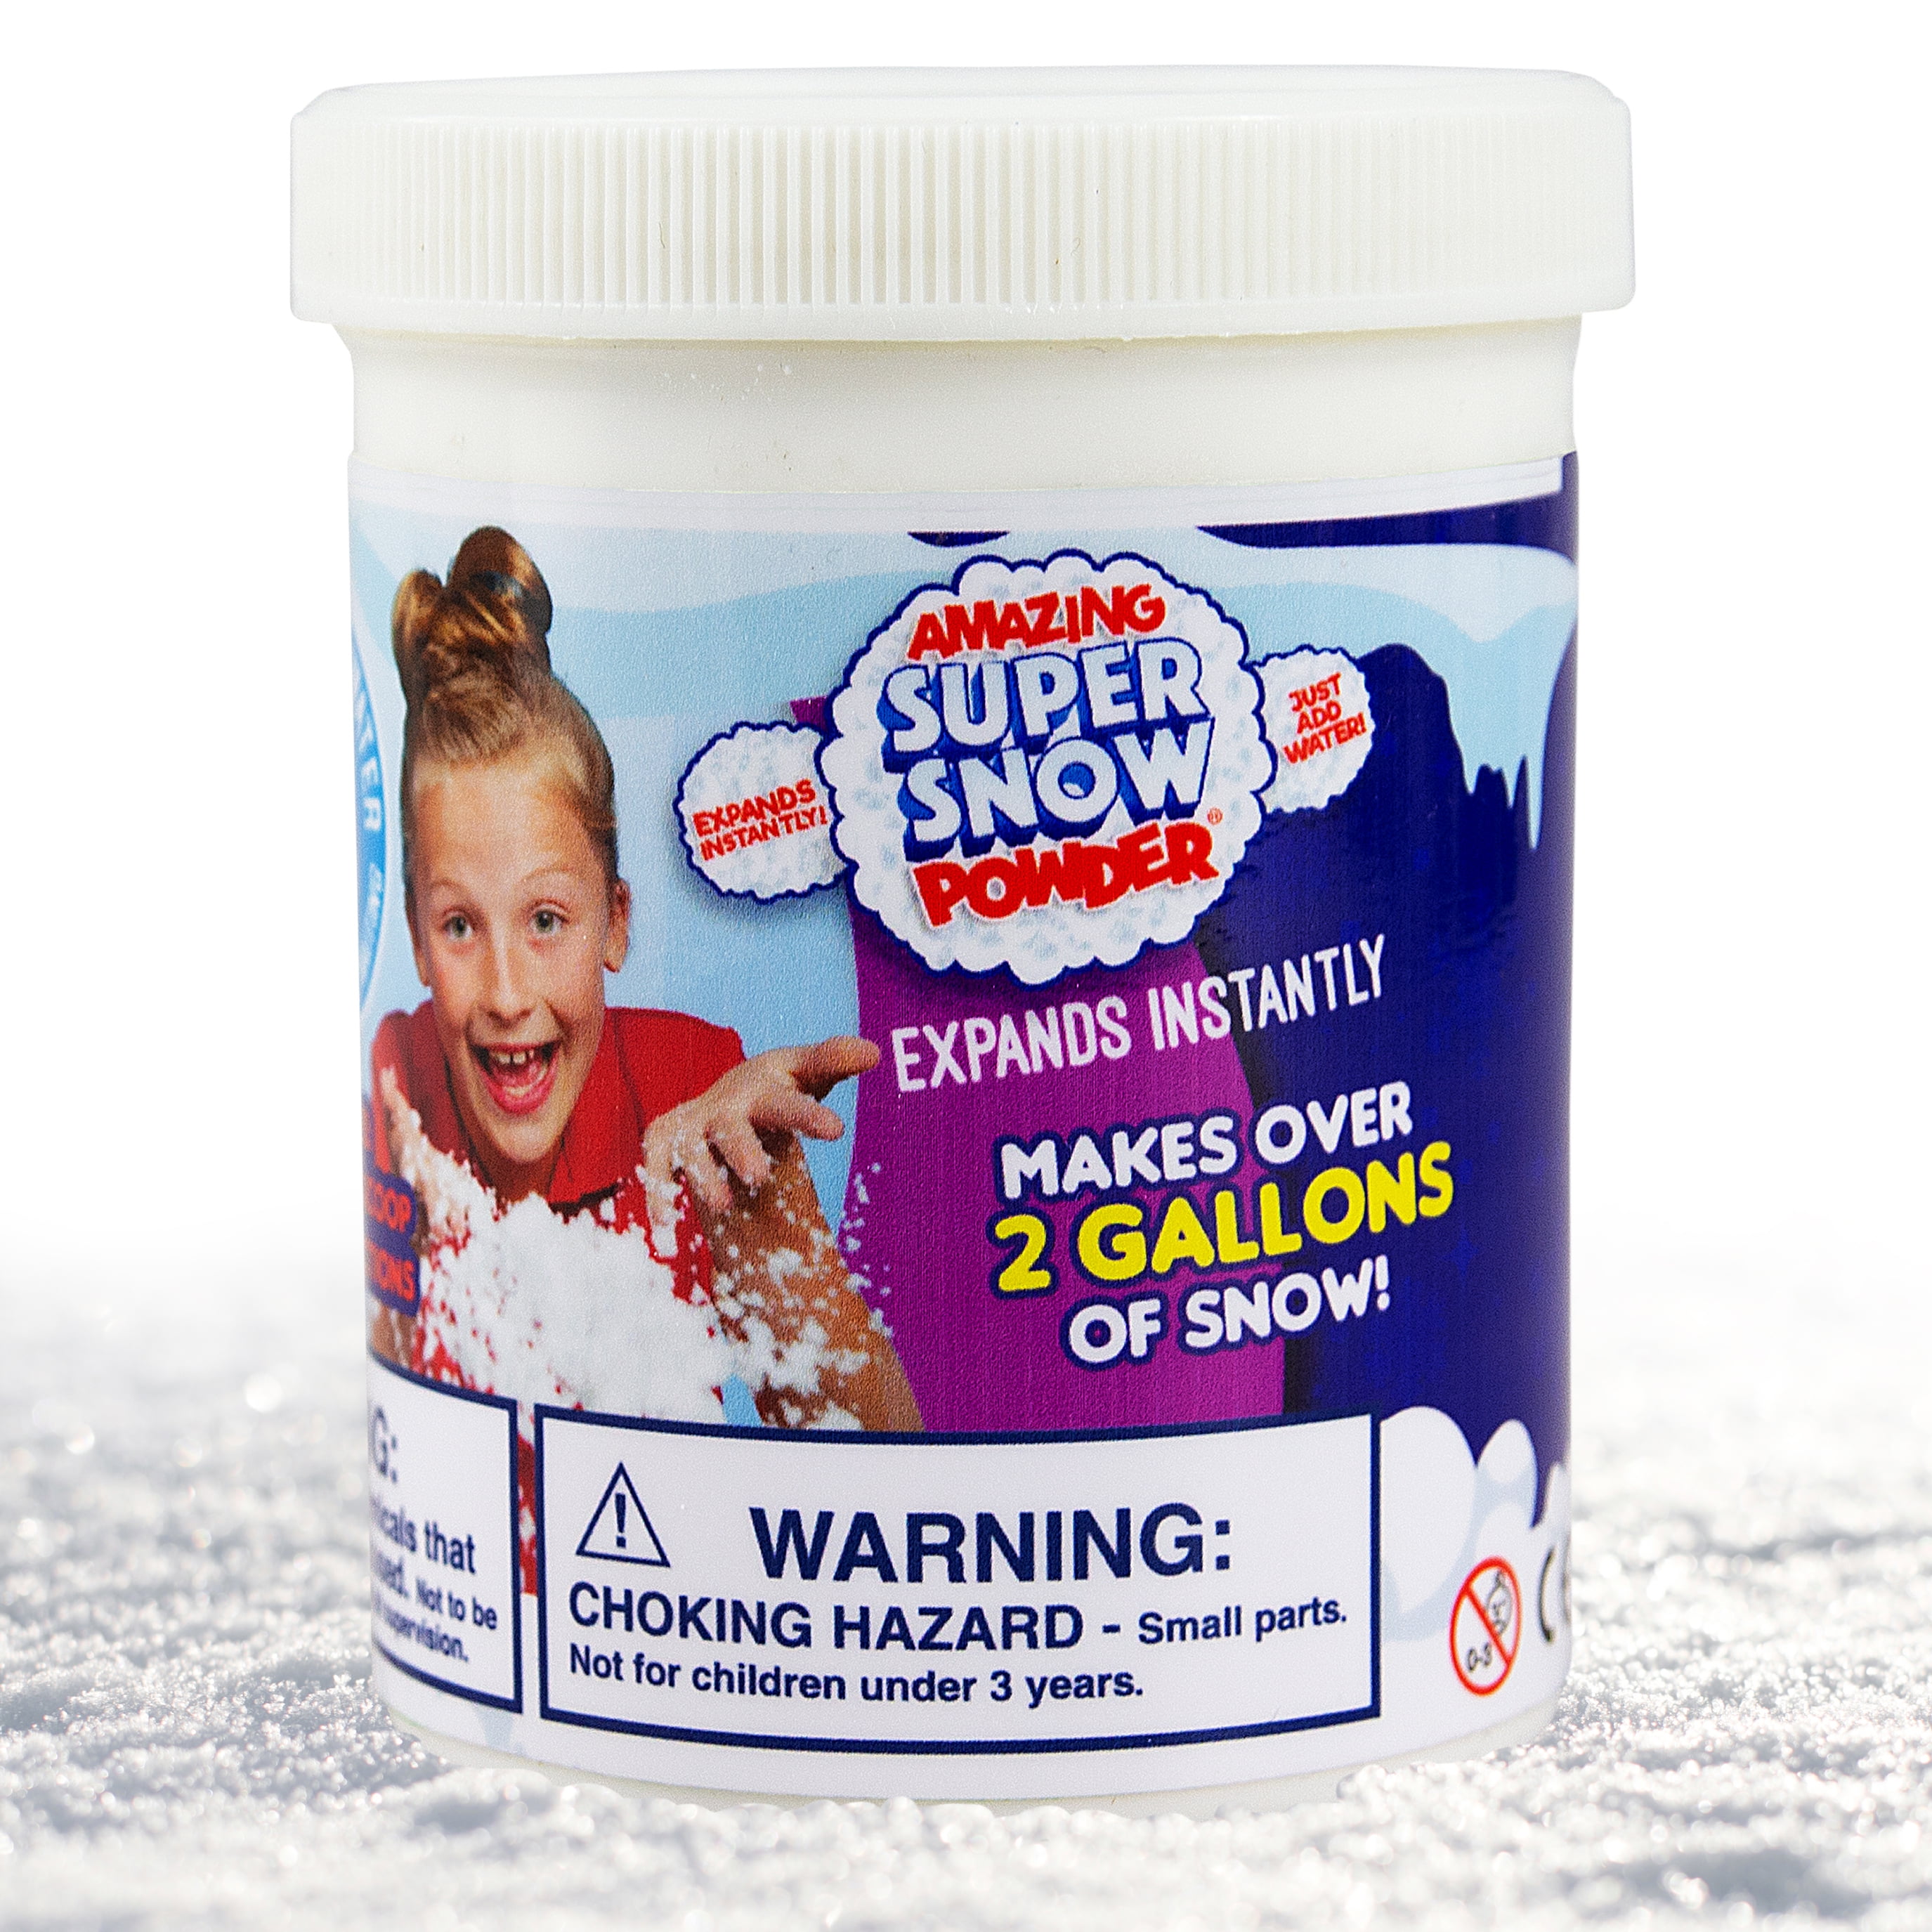  Amazing Super Snow Powder By Be Amazing! Toys Faux